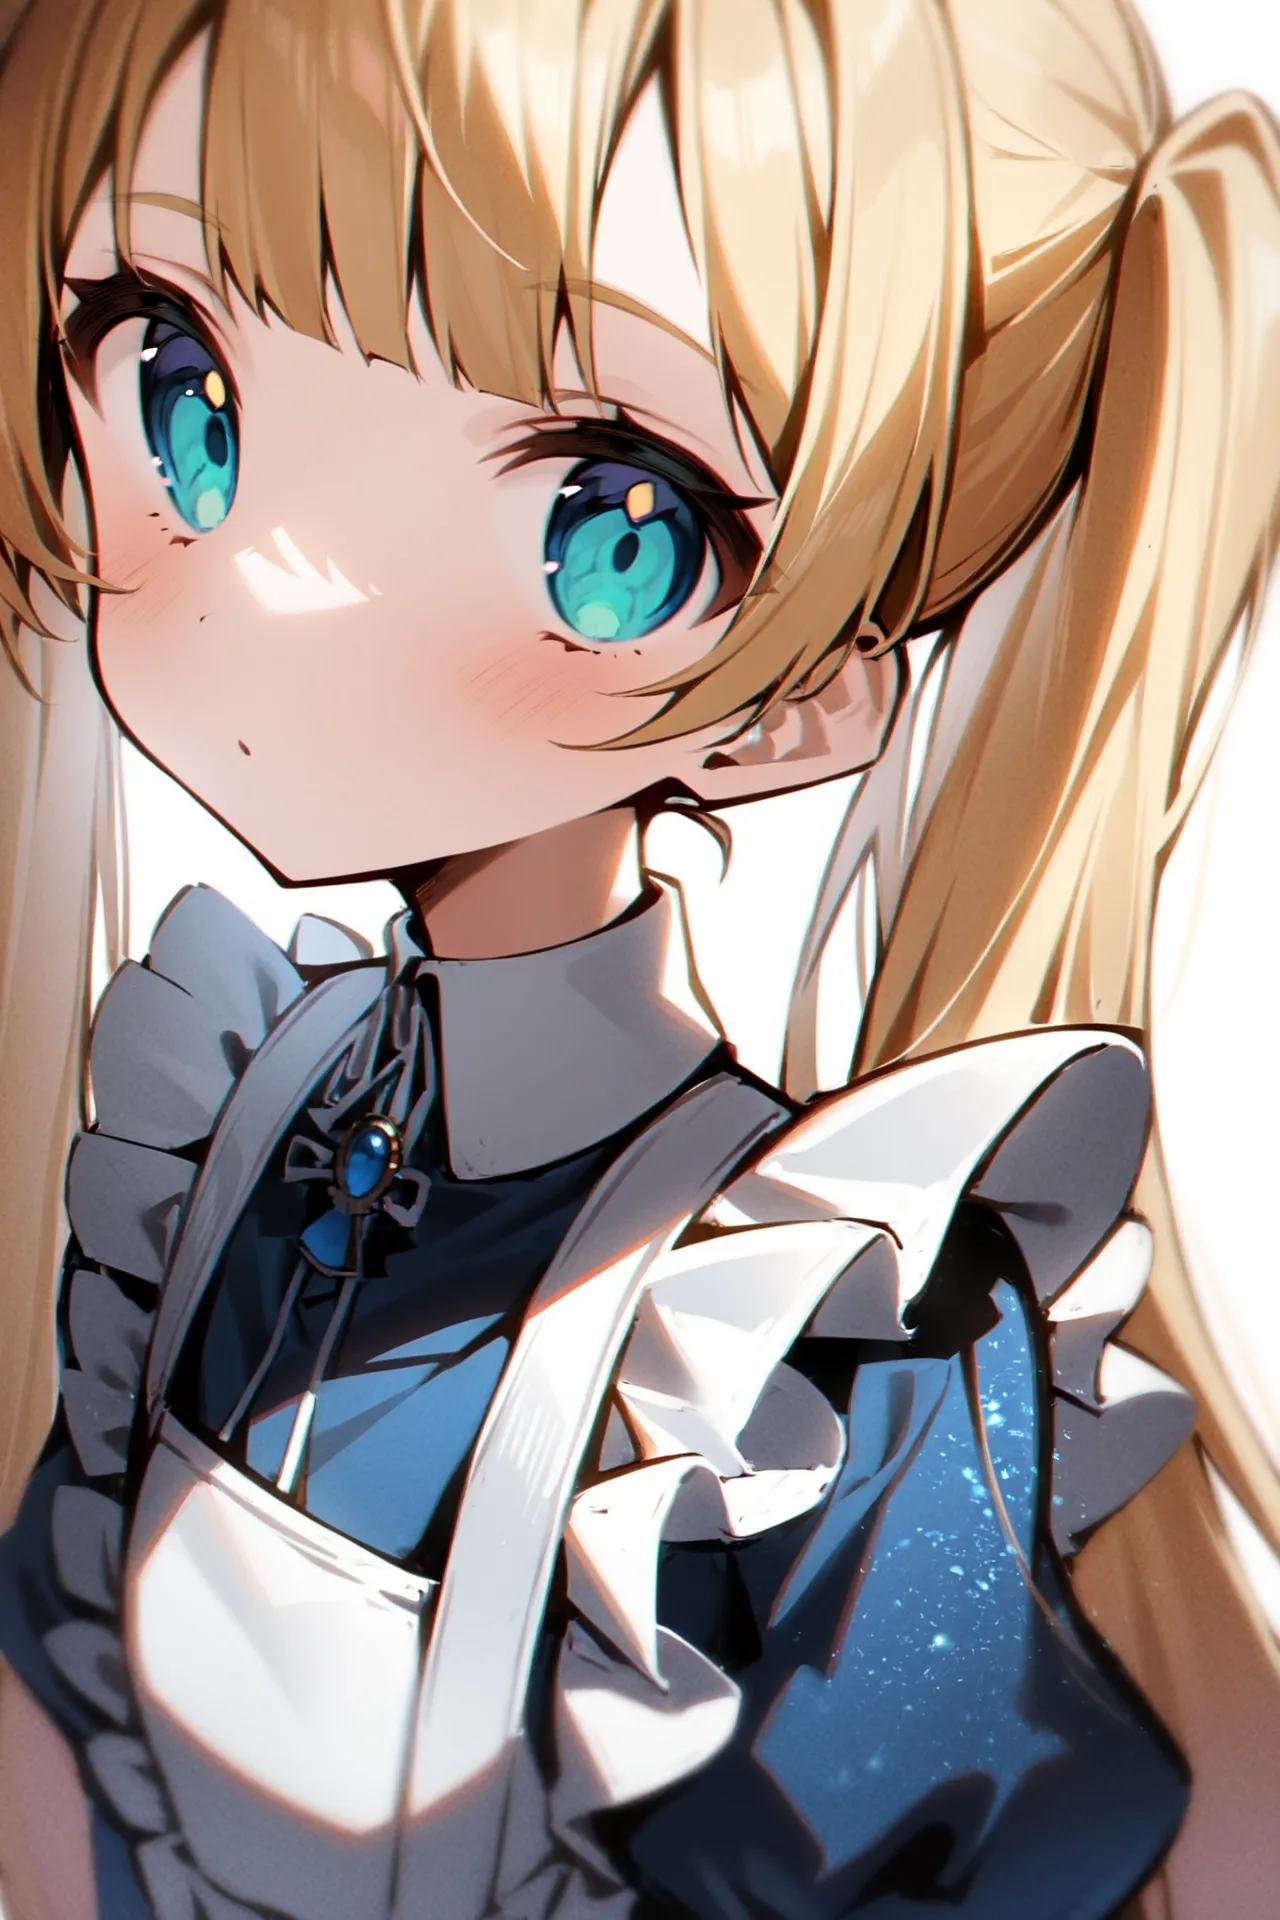 '1girl, close-up,\nblonde hair, twintails, blue dress, white apron,\nwhite background,\nAlice in glitterworld\nNegative prompt: (worst quality, low quality:1.4), nsfw\nSteps: 35, Sampler: DPM++ 2M SDE Karras, CFG scale: 7, Seed: 1, Size: 640x960, Model hash: 642b08ca49, Model: ConfusionXL2.0_fp16_vae, VAE hash: 63aeecb90f, VAE: sdxl_vae_0.9.safetensors, Denoising strength: 0.6, Clip skip: 2, Hires upscale: 2, Hires steps: 15, Hires upscaler: ESRGAN_4x, Eta: 0.68, Version: v1.7.0'